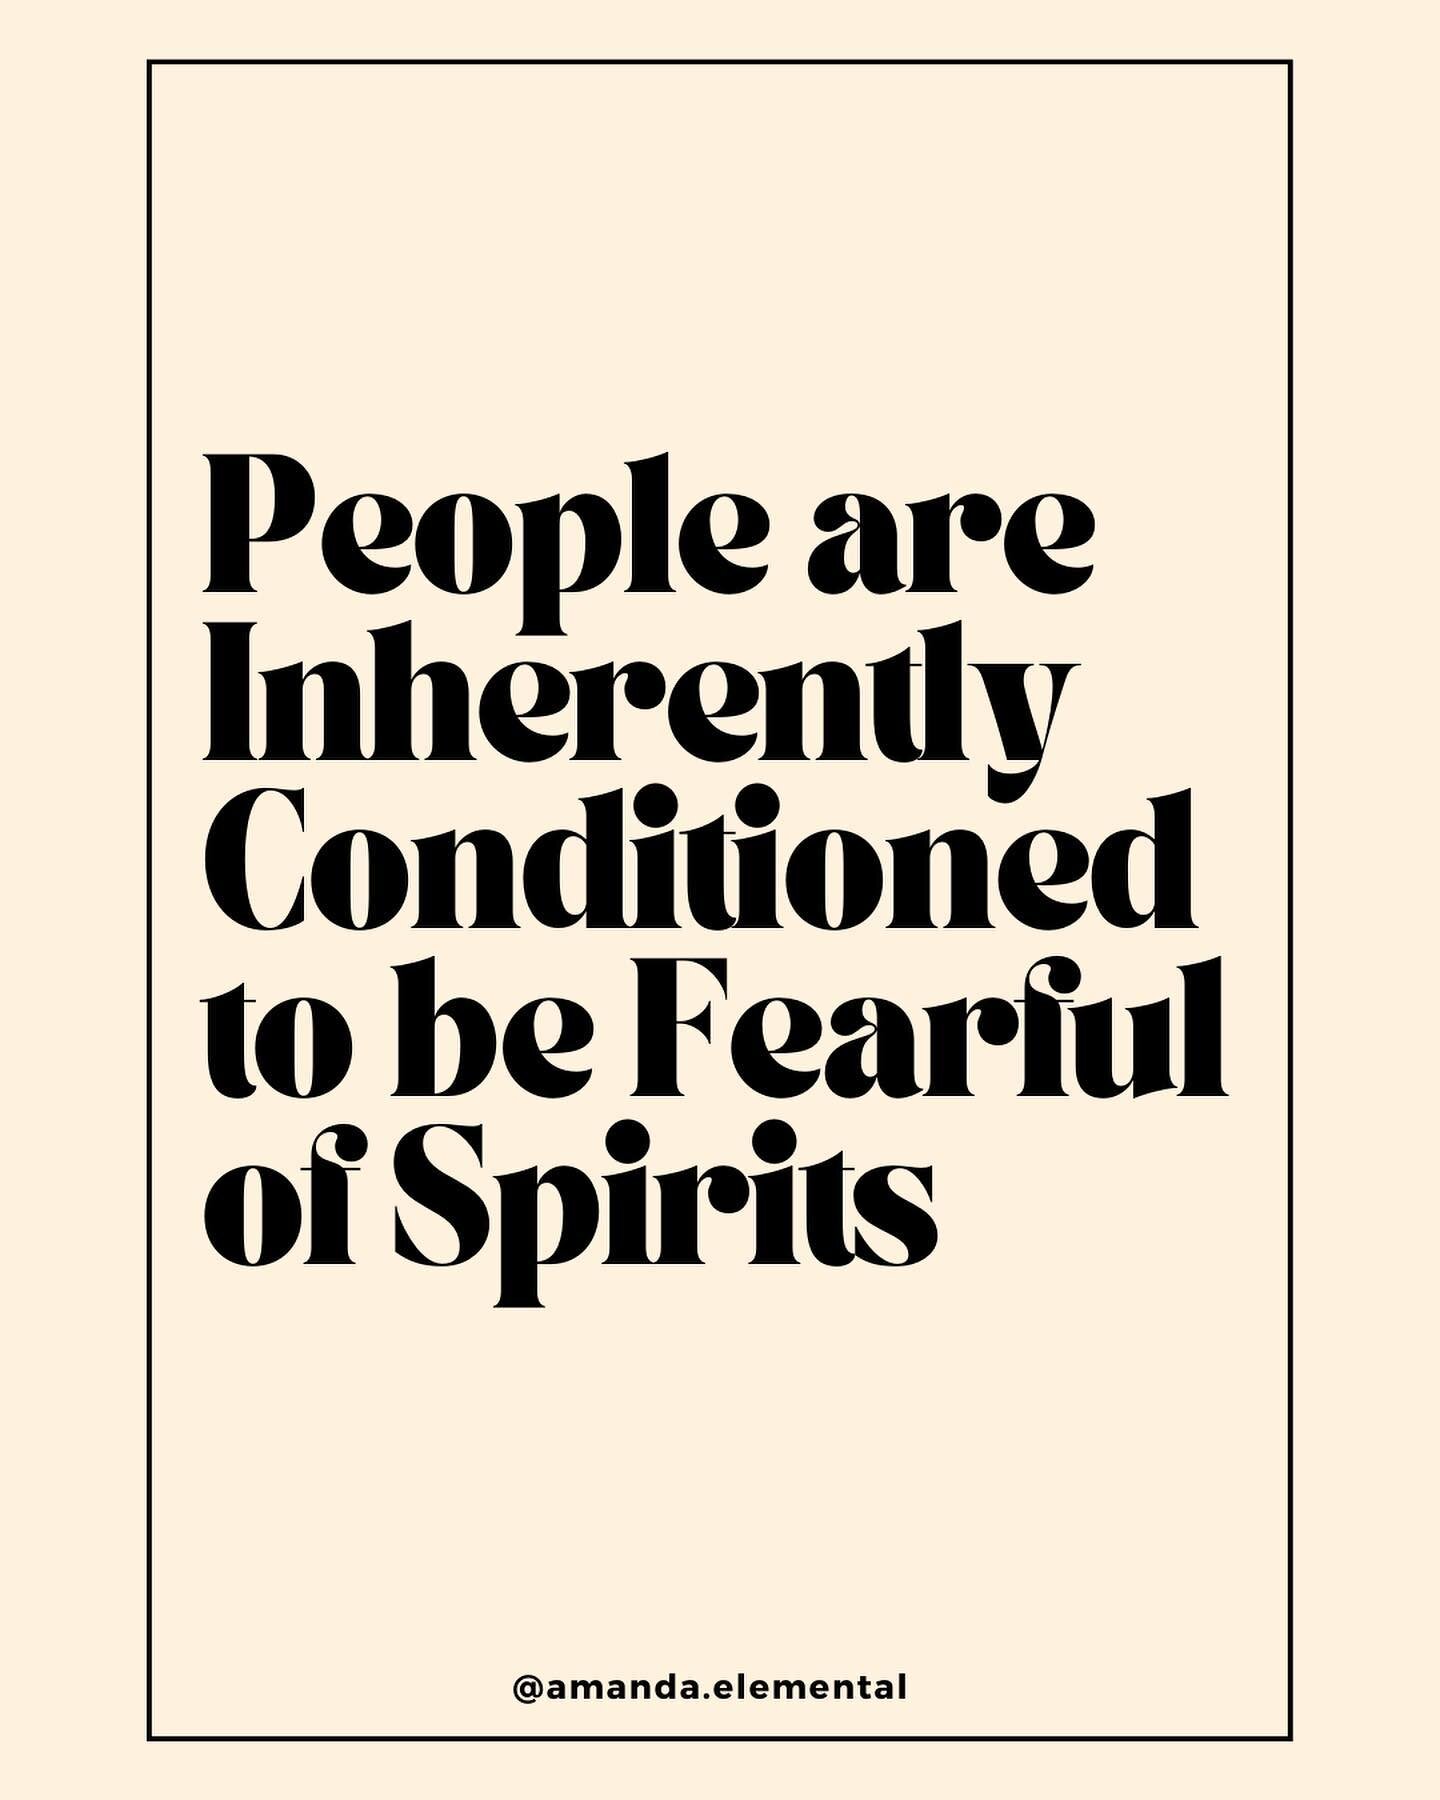 〰️ Spirit isn&rsquo;t meant to be scary 〰️

As humans, we&rsquo;re taught to fear the unknown. 

Combine that with Hollywood&rsquo;s dramatization of ghosts and spirits being &ldquo;evil&rdquo; and you have a perfect recipe for being afraid of spirit